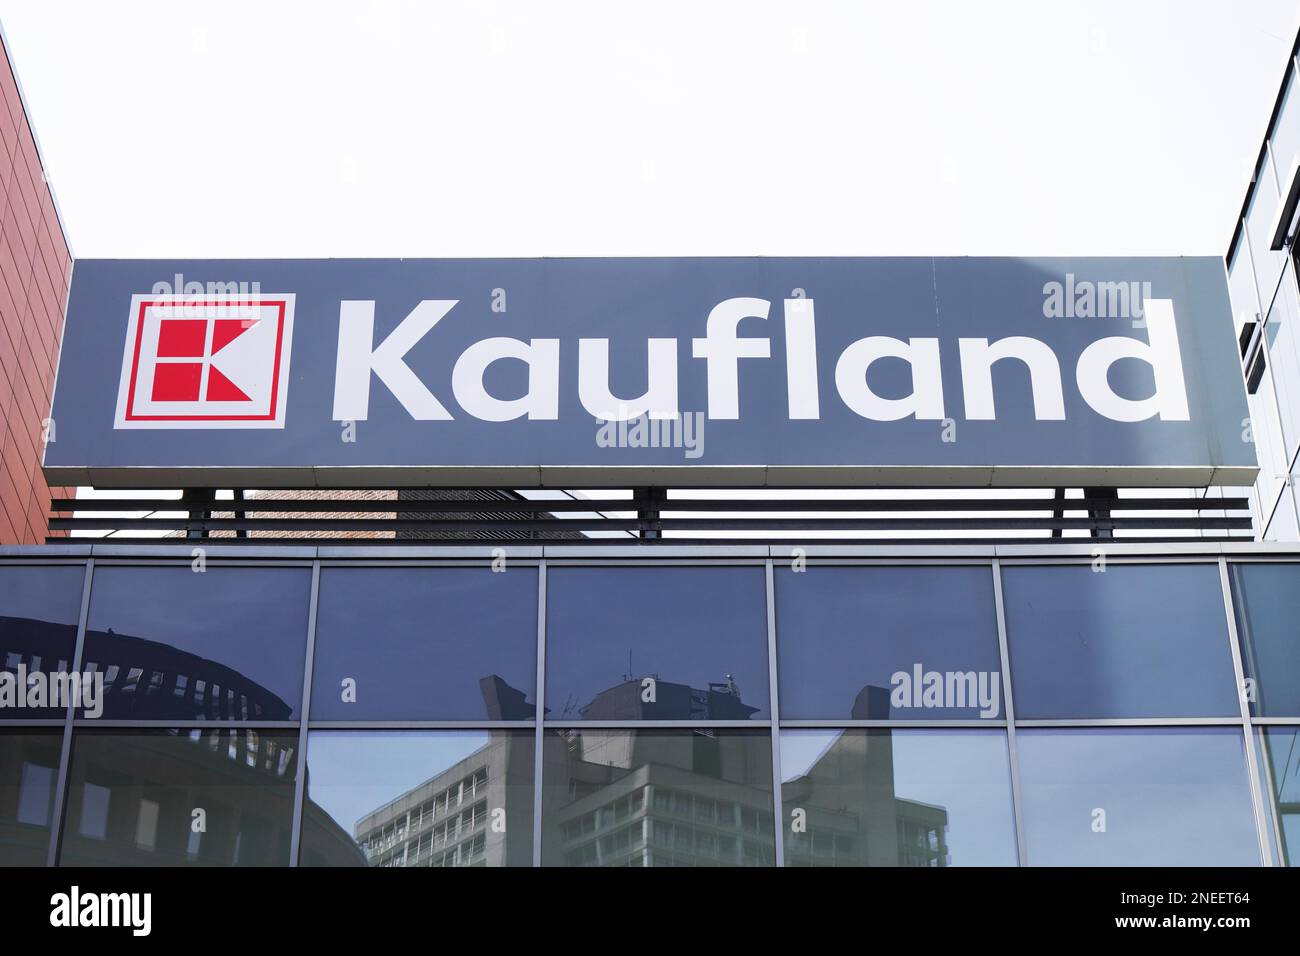 Hannover, Germany - March 2, 2020: Kaufland is a German hypermarket or supermarket chain. Sign with logo and brand on store building exterior Stock Photo